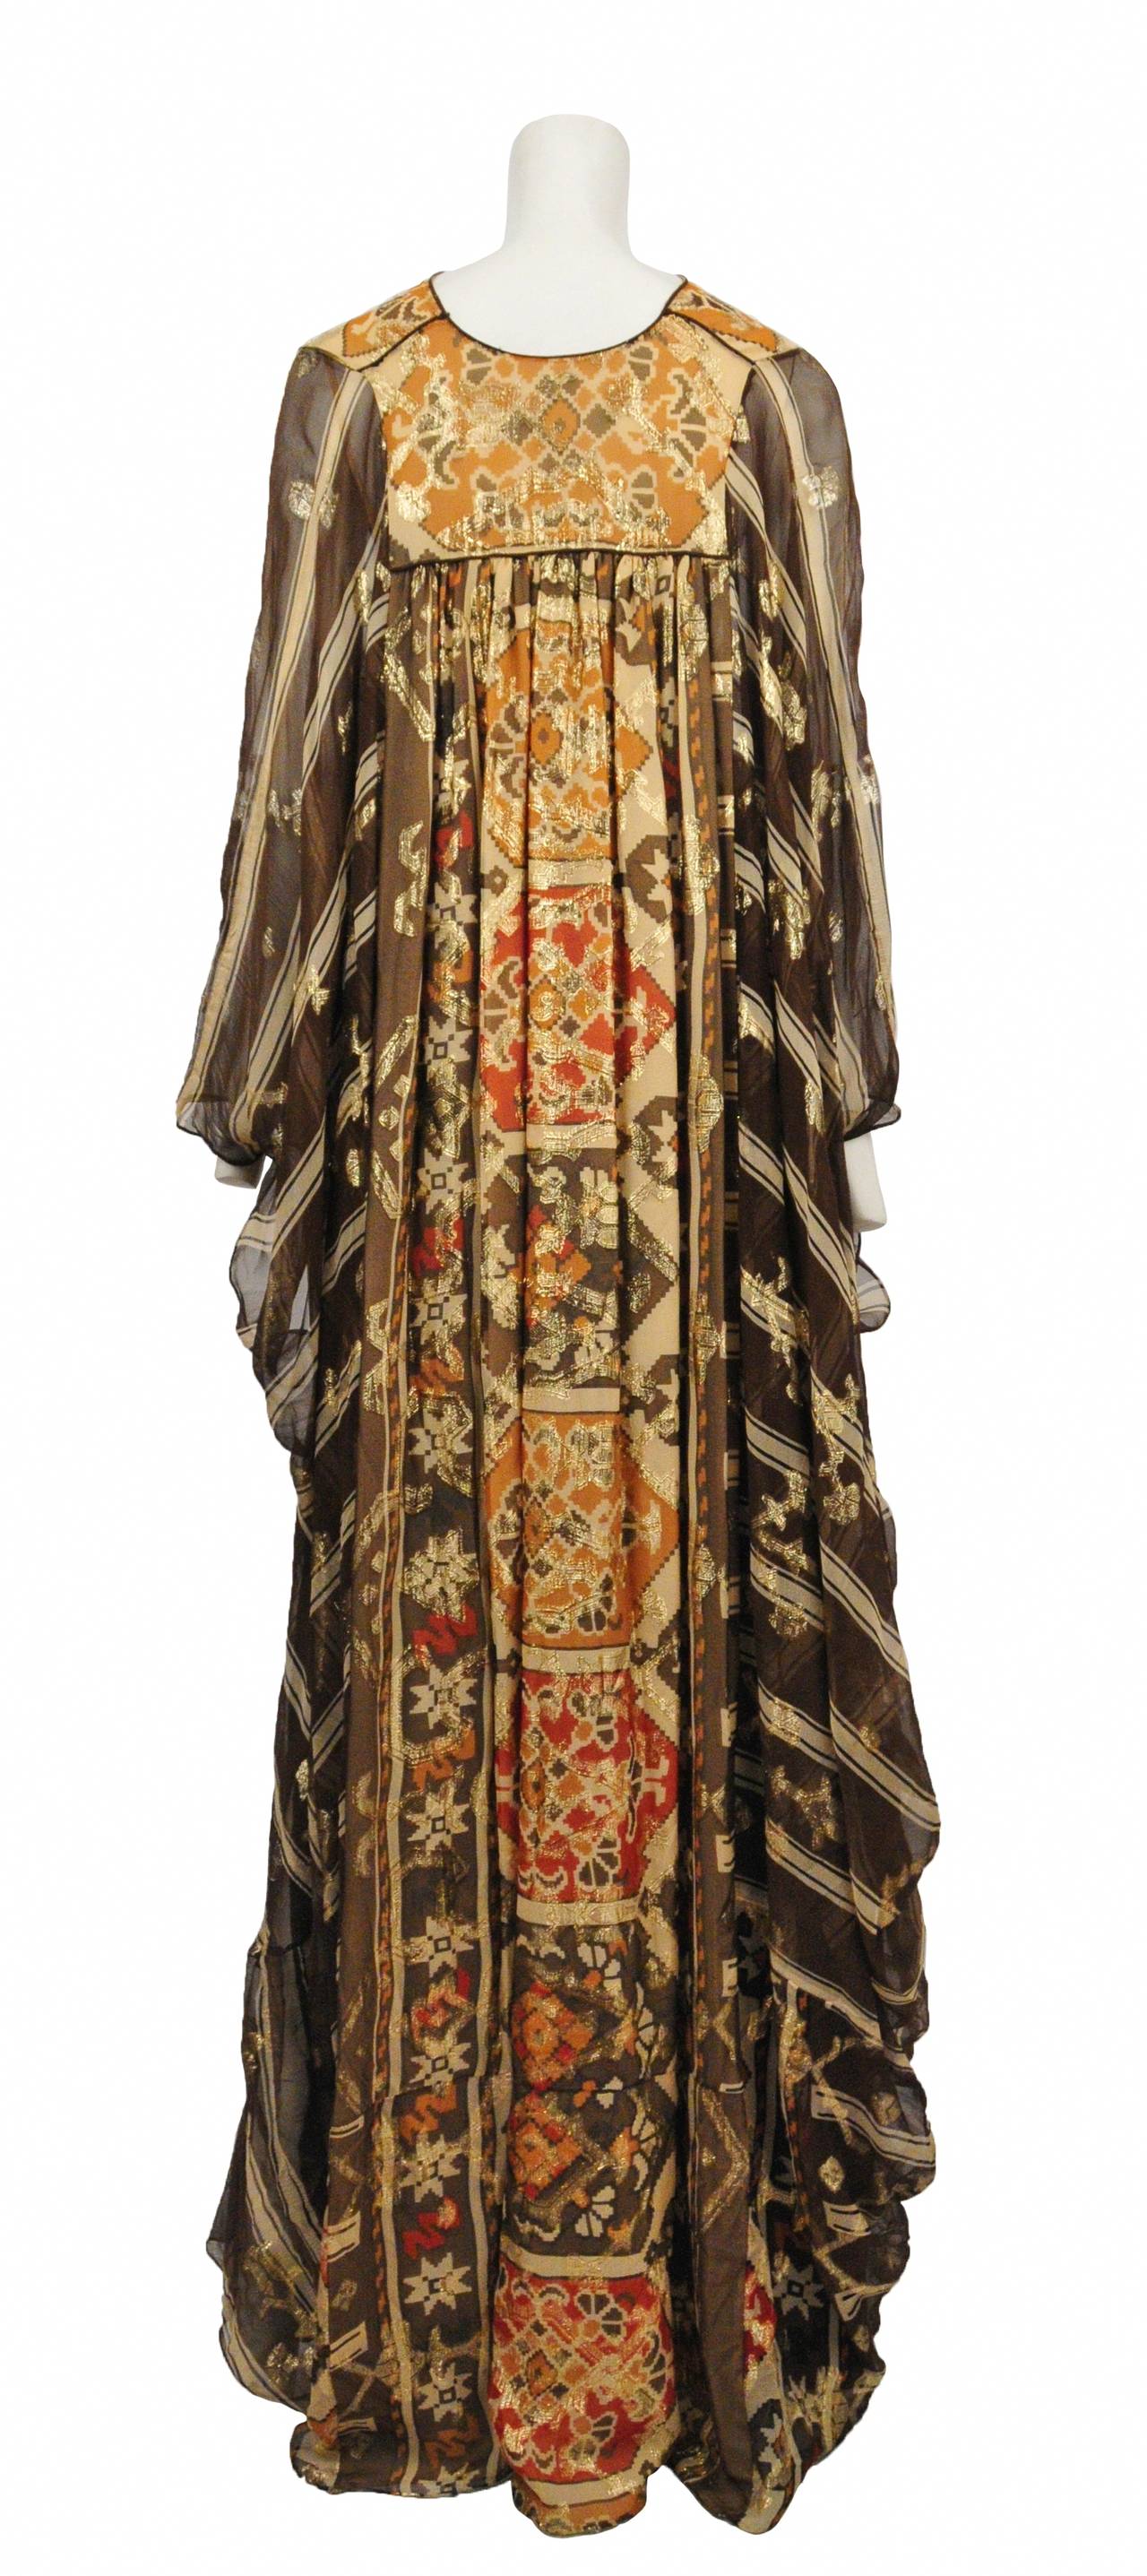 Vintage 1970s Thea Porter earth tone multi fabric silk caftan with gold floral pattern embroidery and silk sash waist tie. 100% silk full length chocolate brown slip included- Sized Large